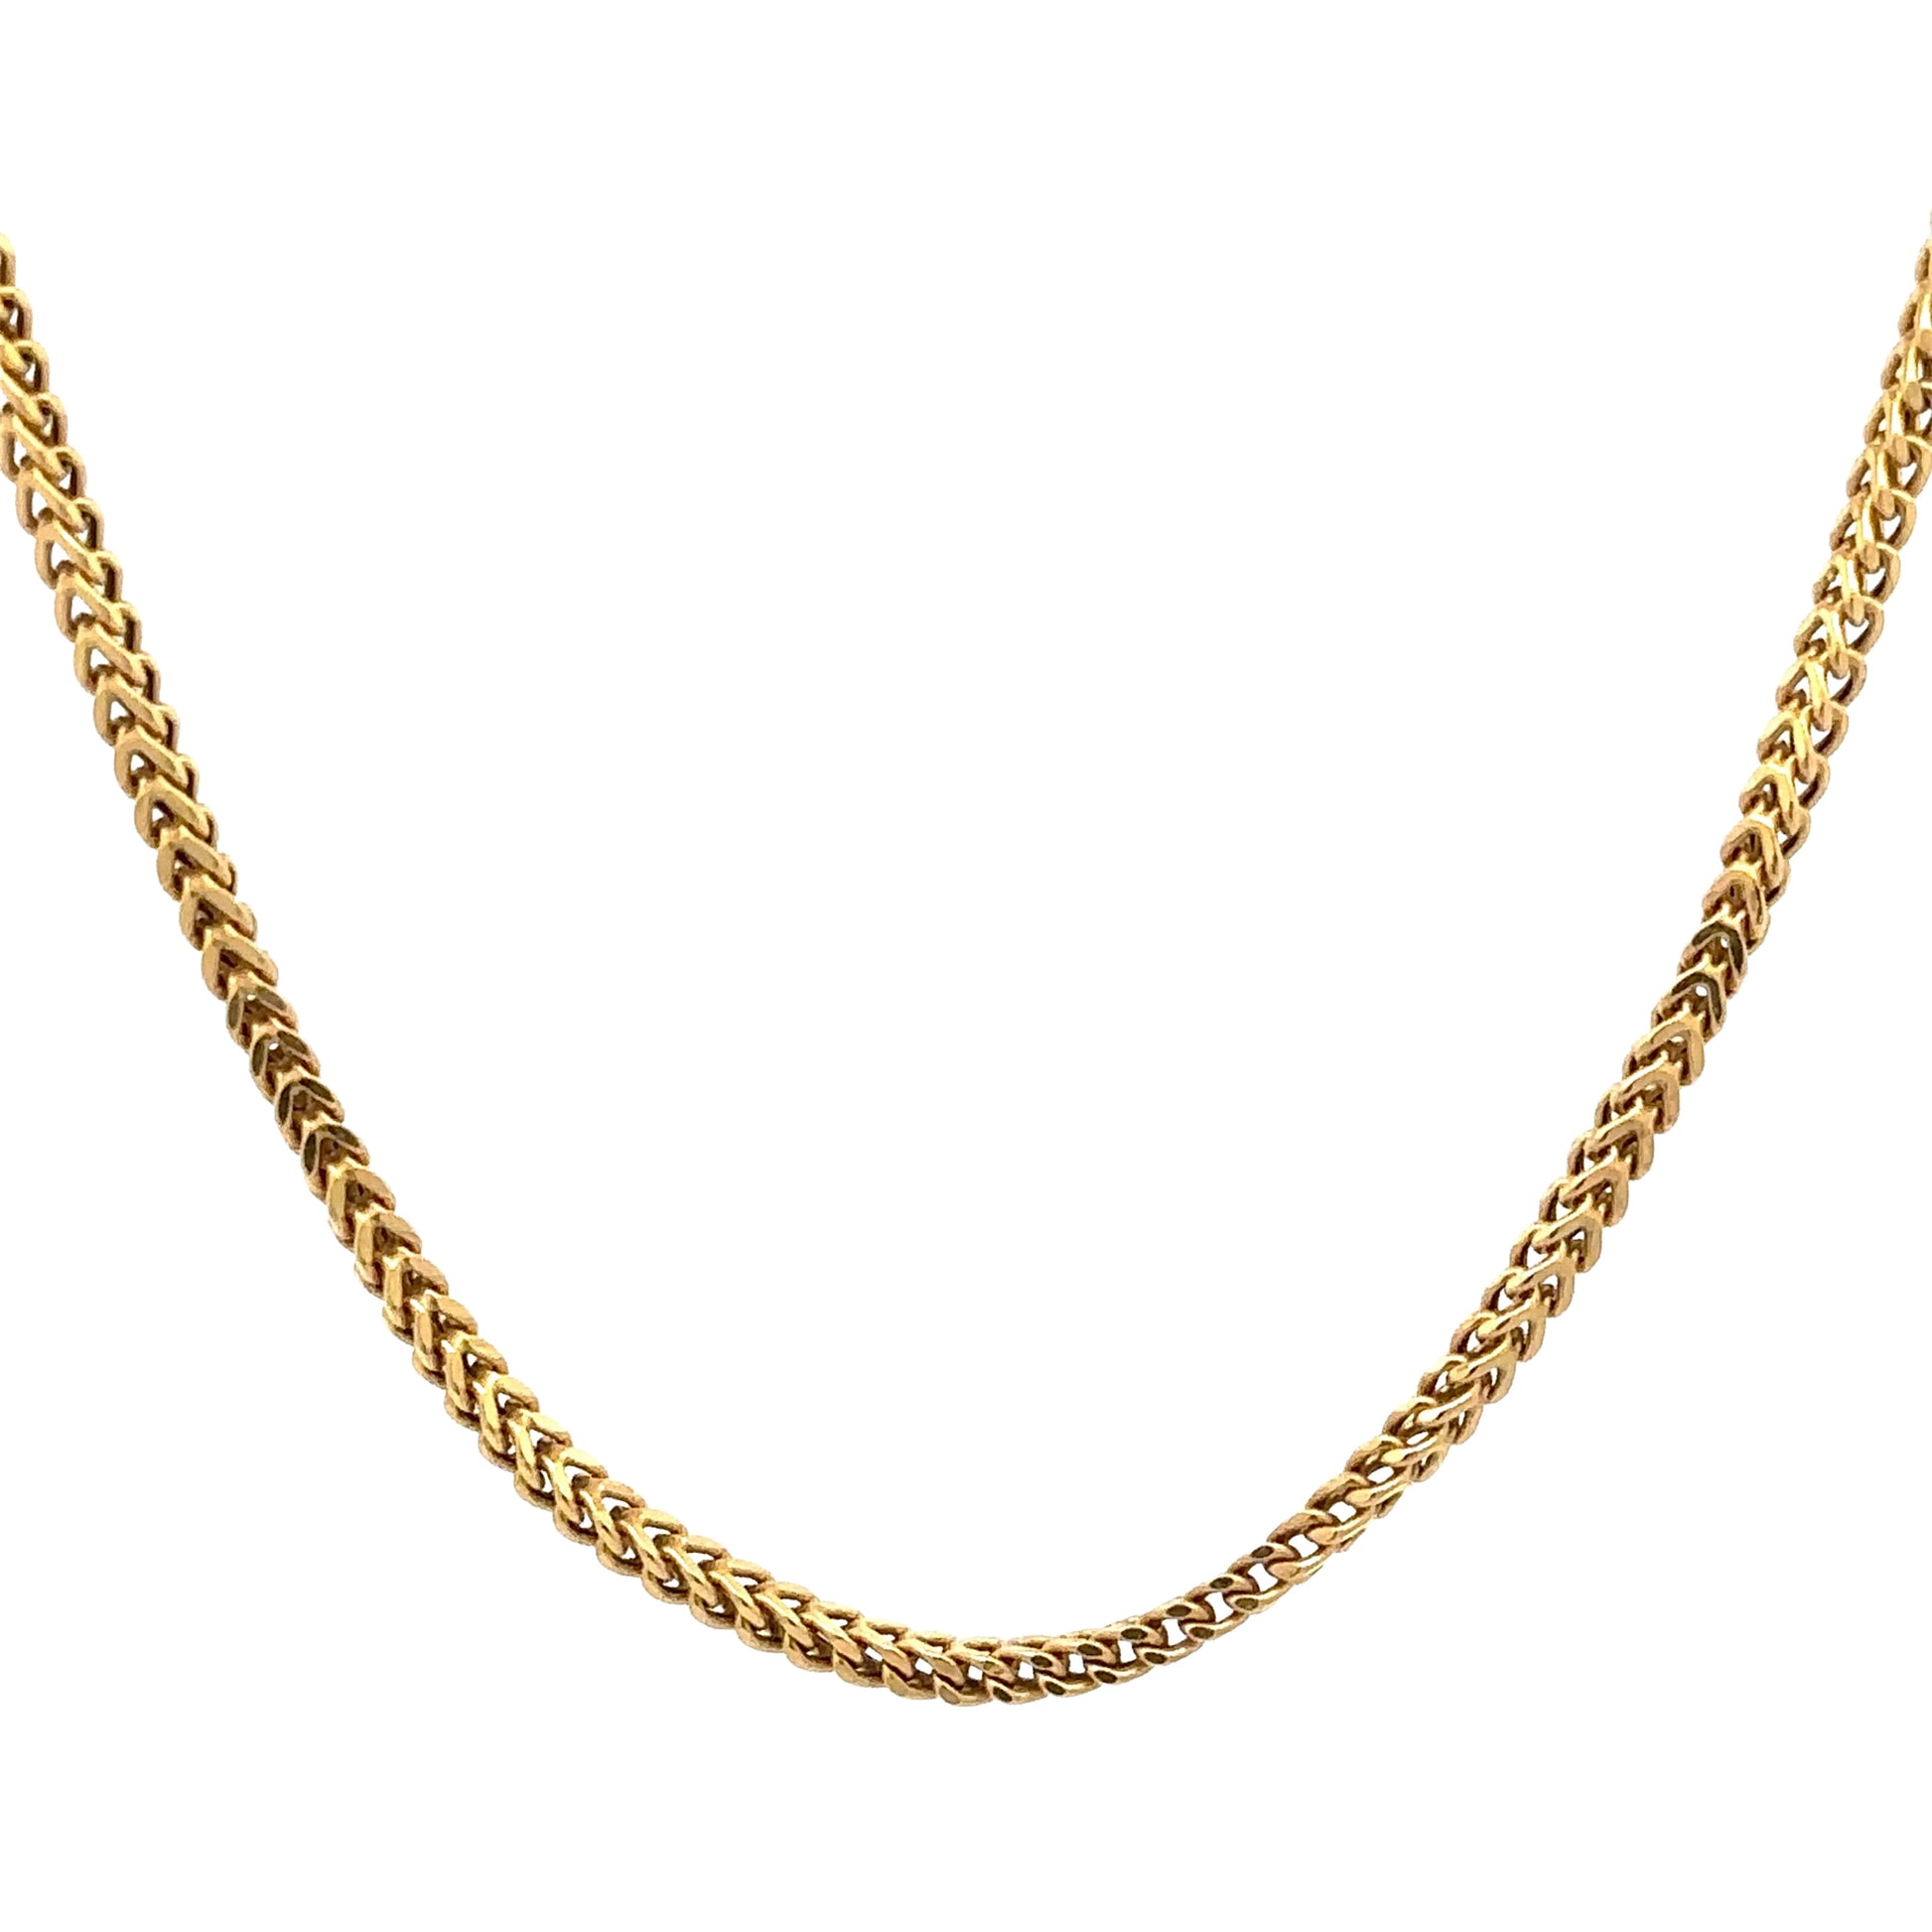 Hanging yellow gold square franco chain